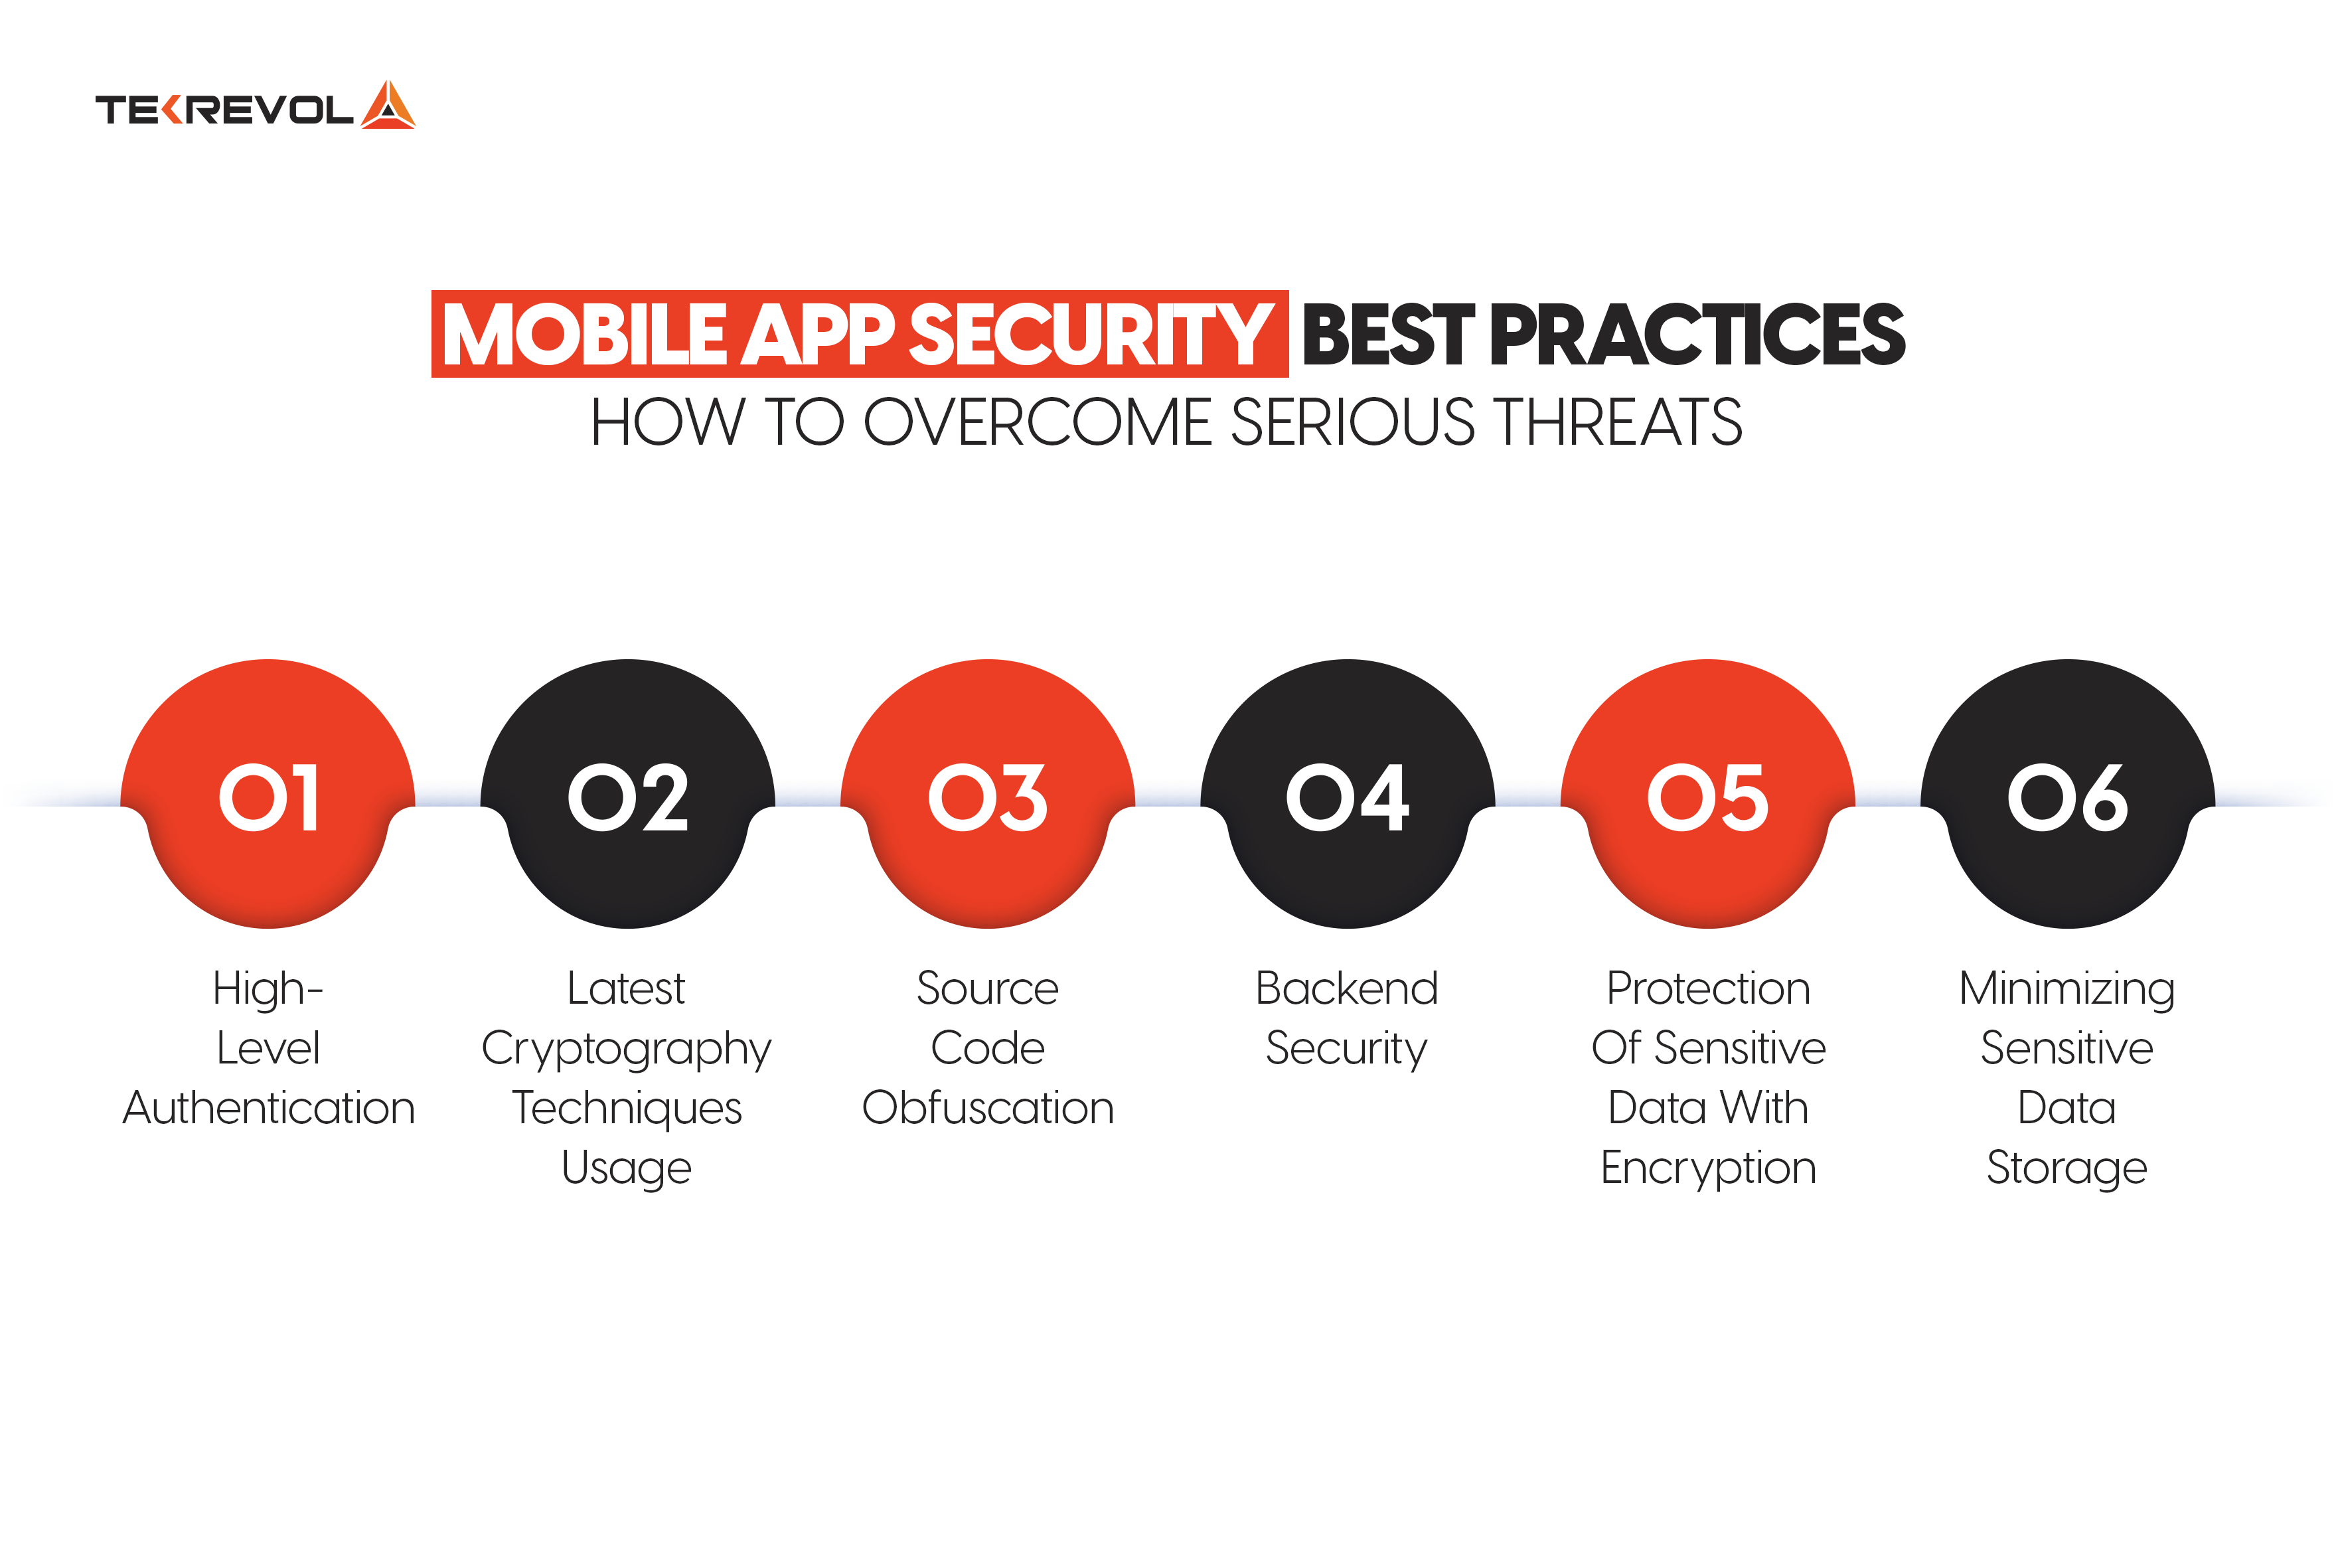 Mobile App Security Best Practices – How to Safeguard Your Mobile Apps from Serious Susceptibilities